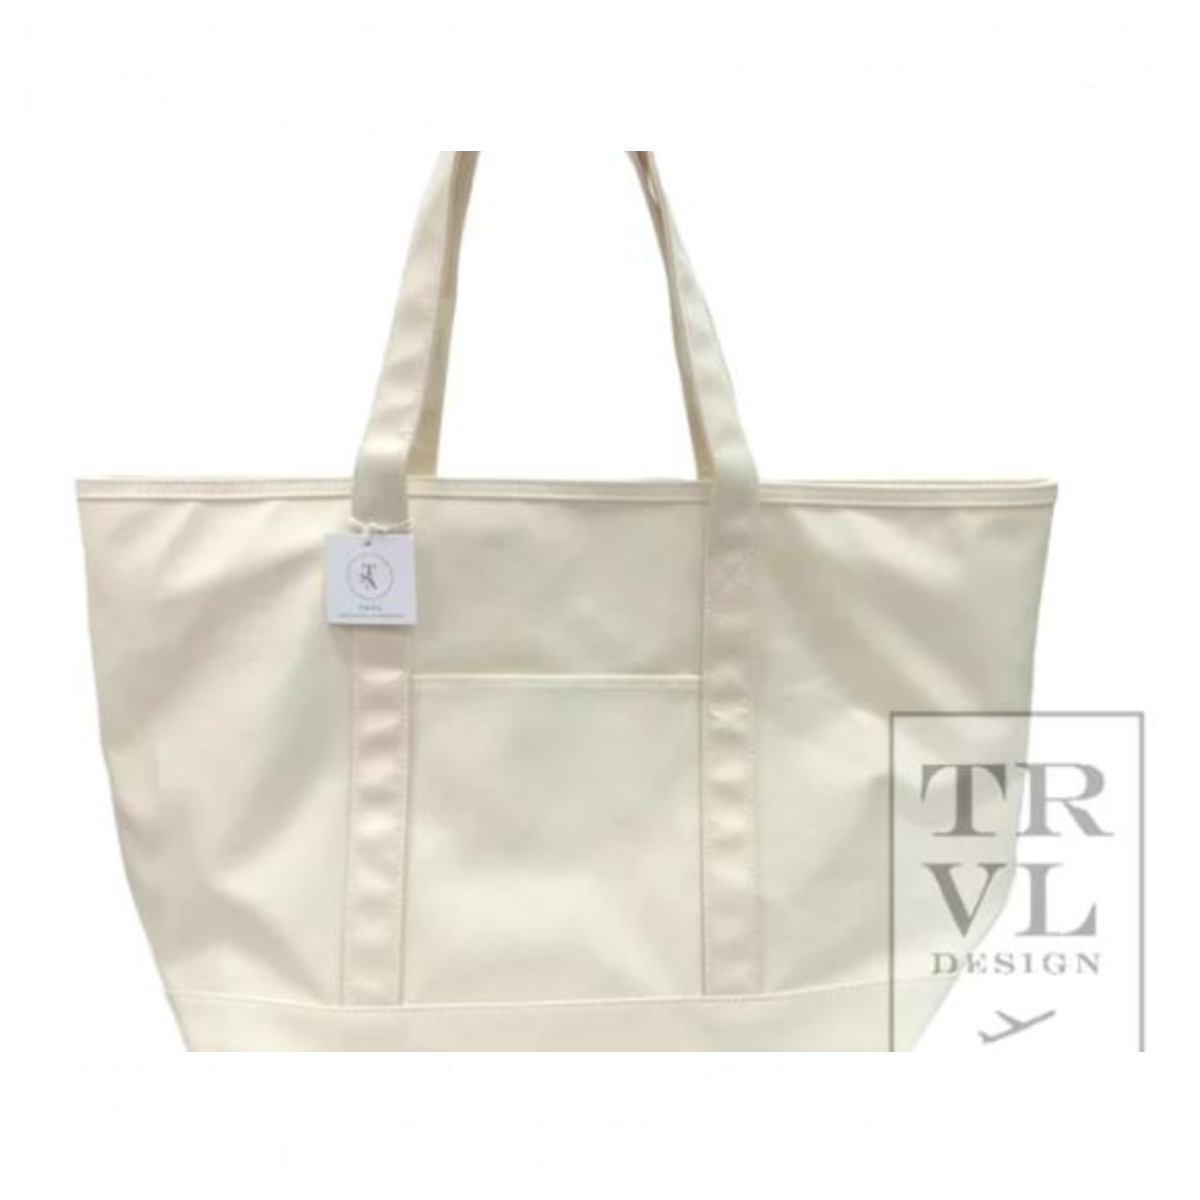 Canvas Coated Totes in 3 Sizes and a Variety of Colors by TRVL